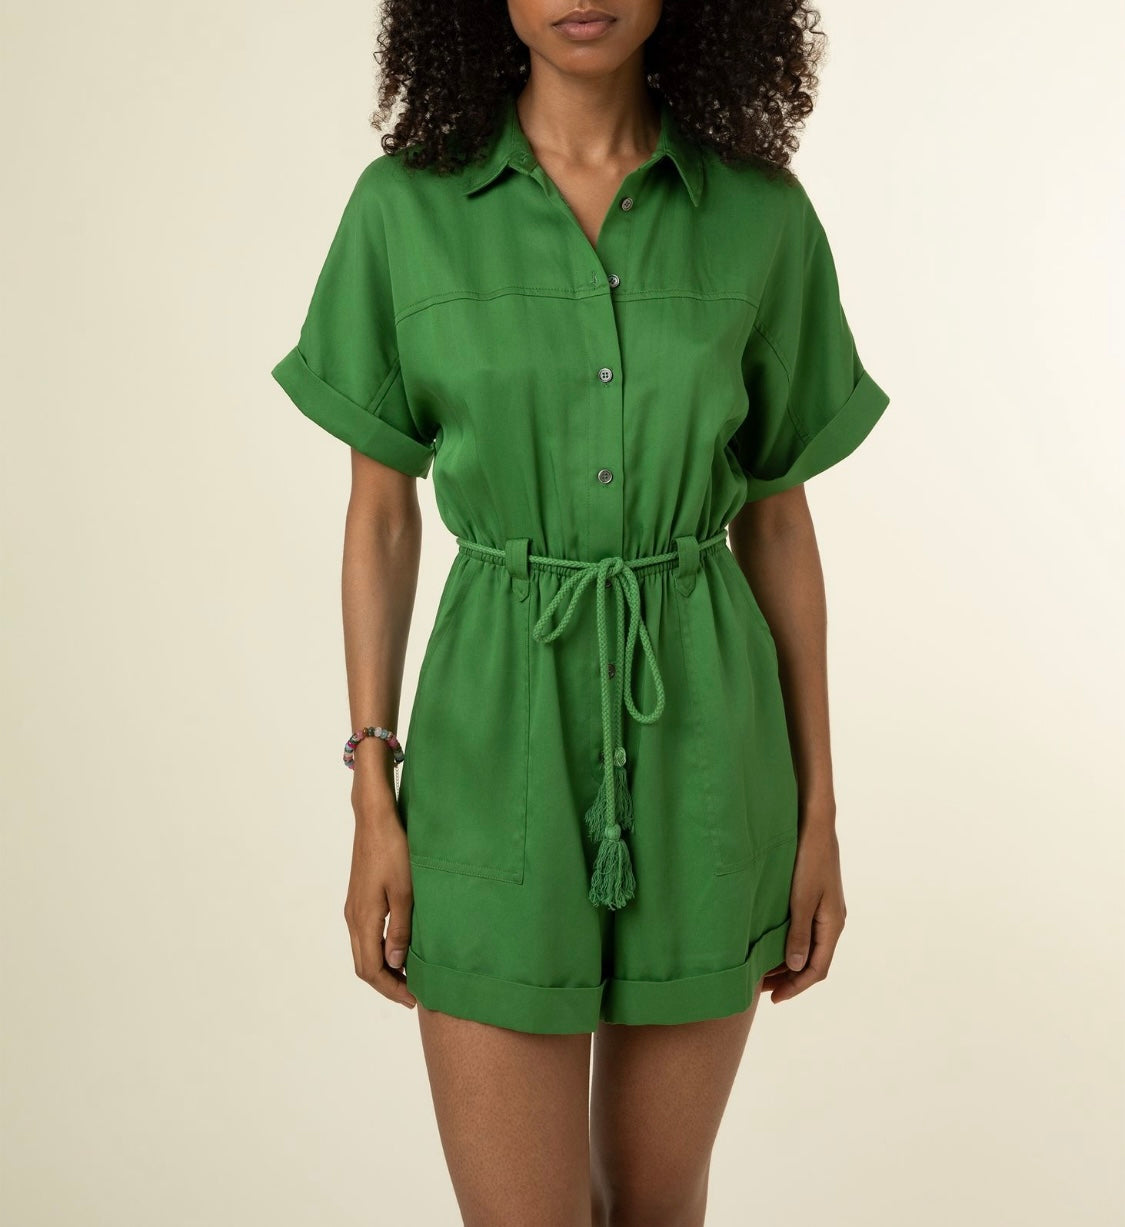 LILY PLAYSUIT OLIVE